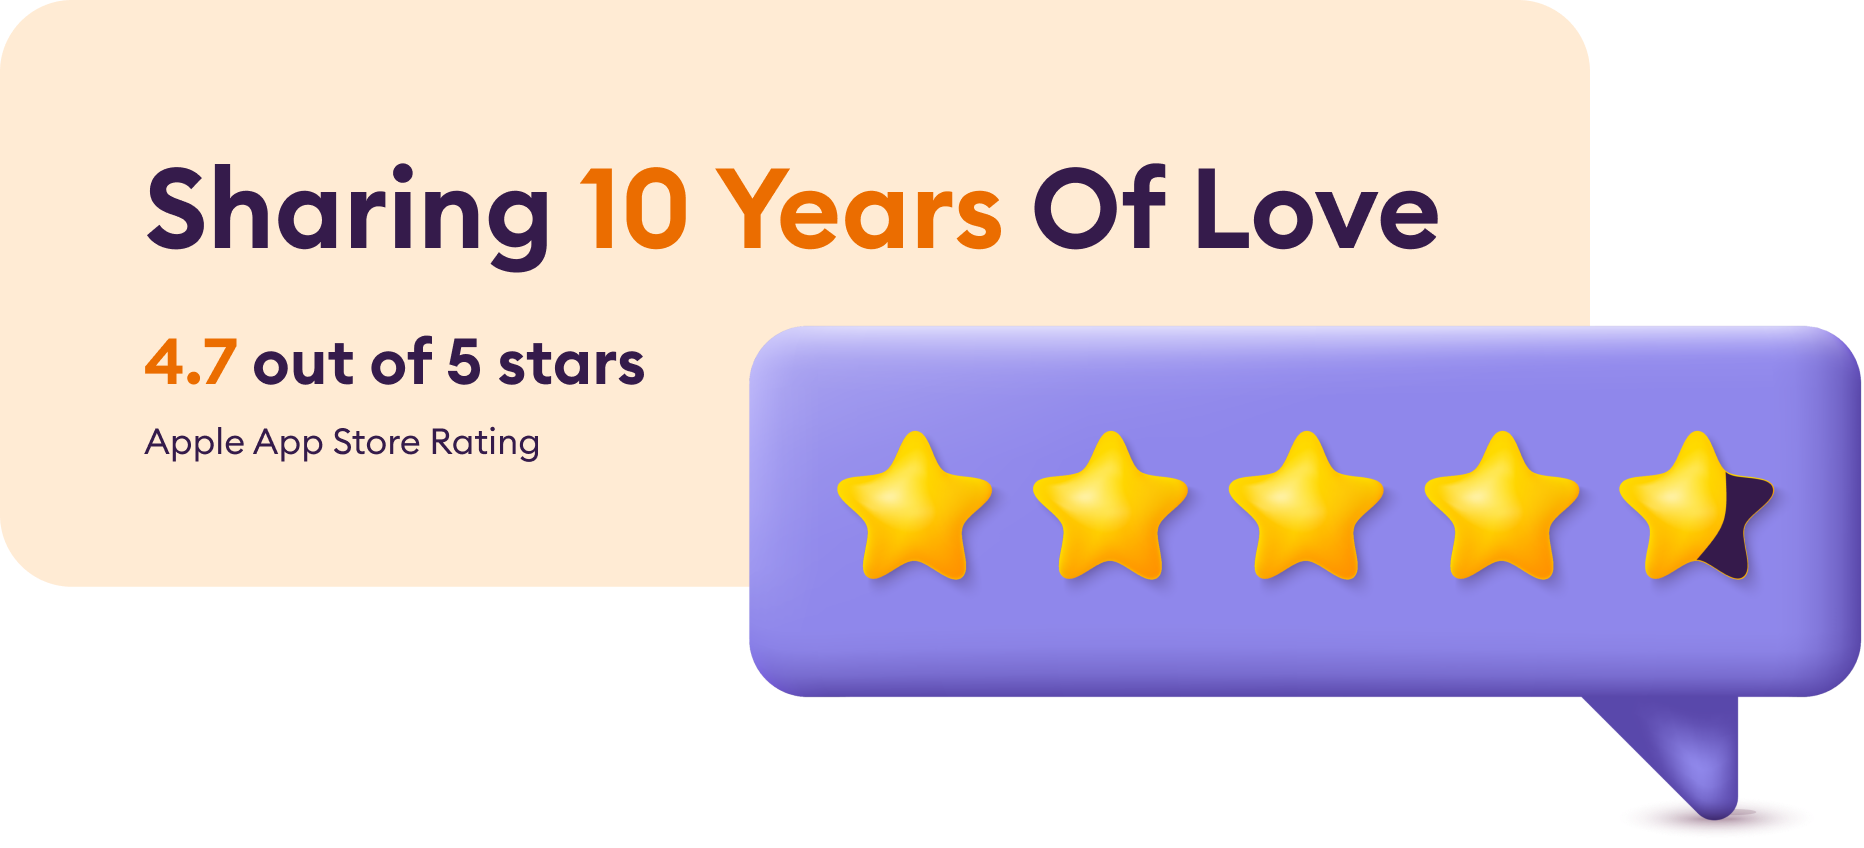 Sharing 10 years of love, 4.7 out of 5 stars